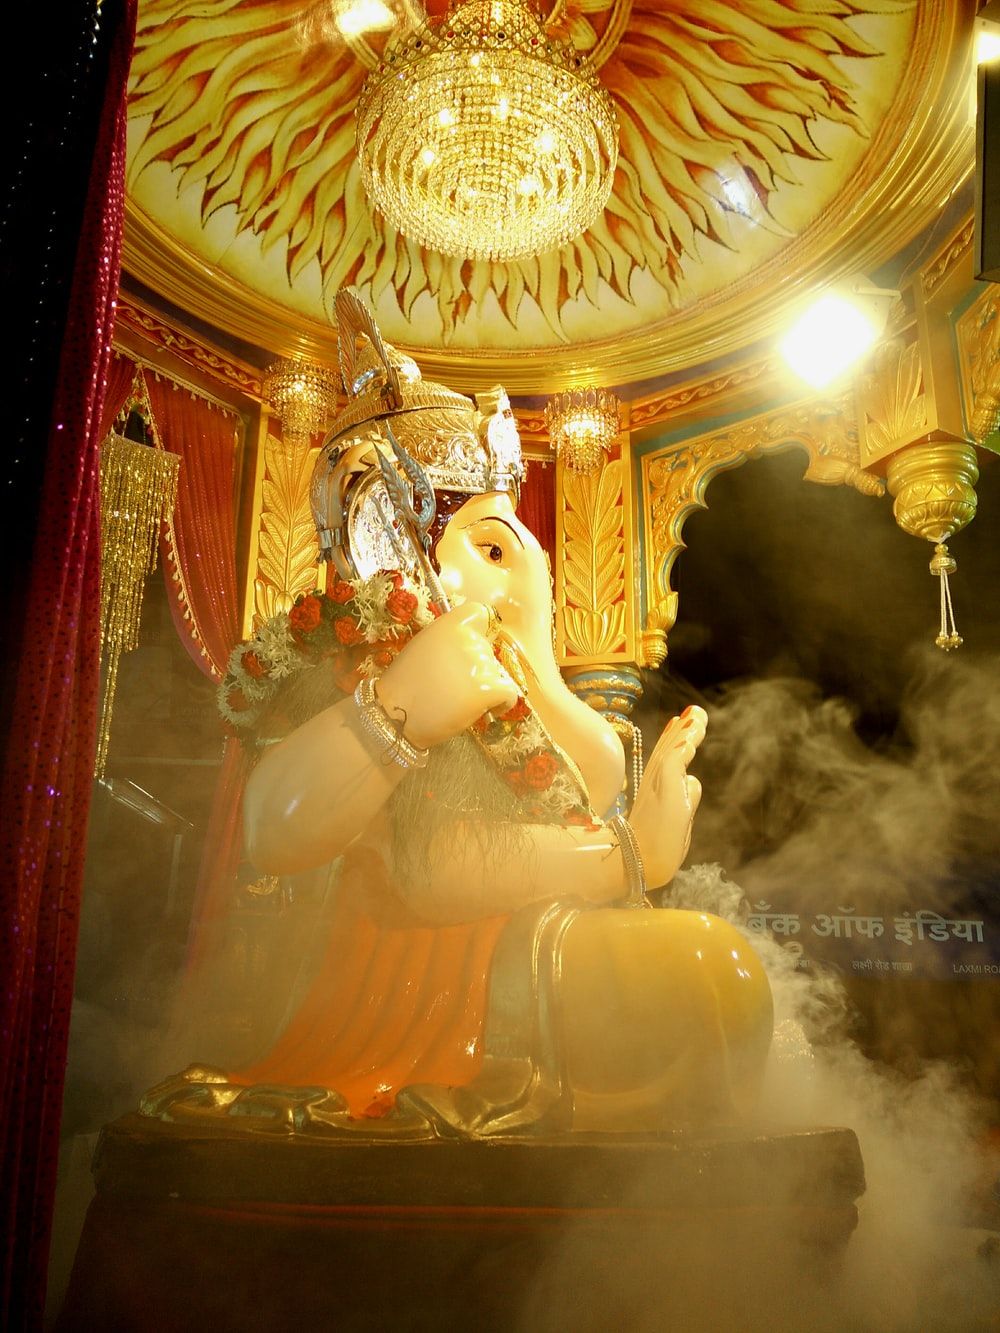 Lord Ganesh Image. Download Free Picture